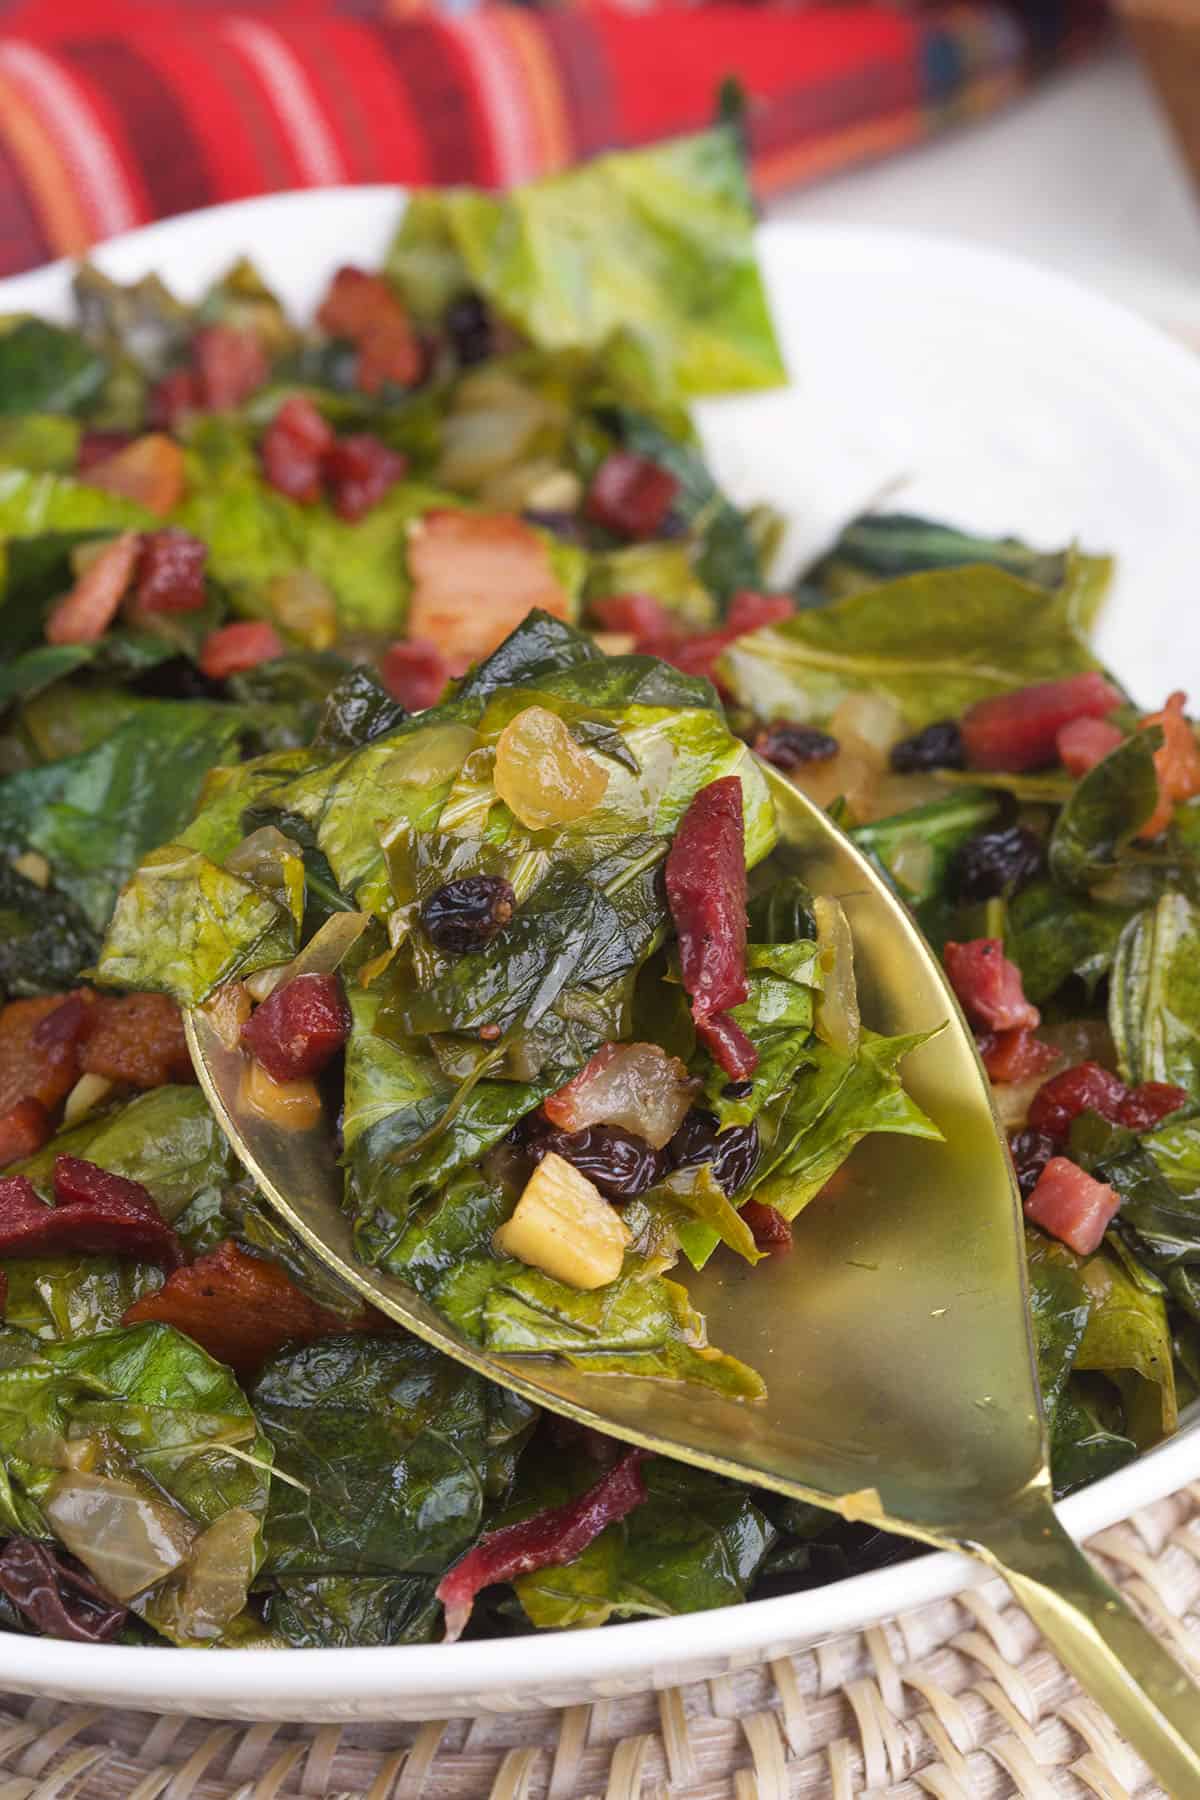 A scoop of collard greens is being held above the rest of the dish.